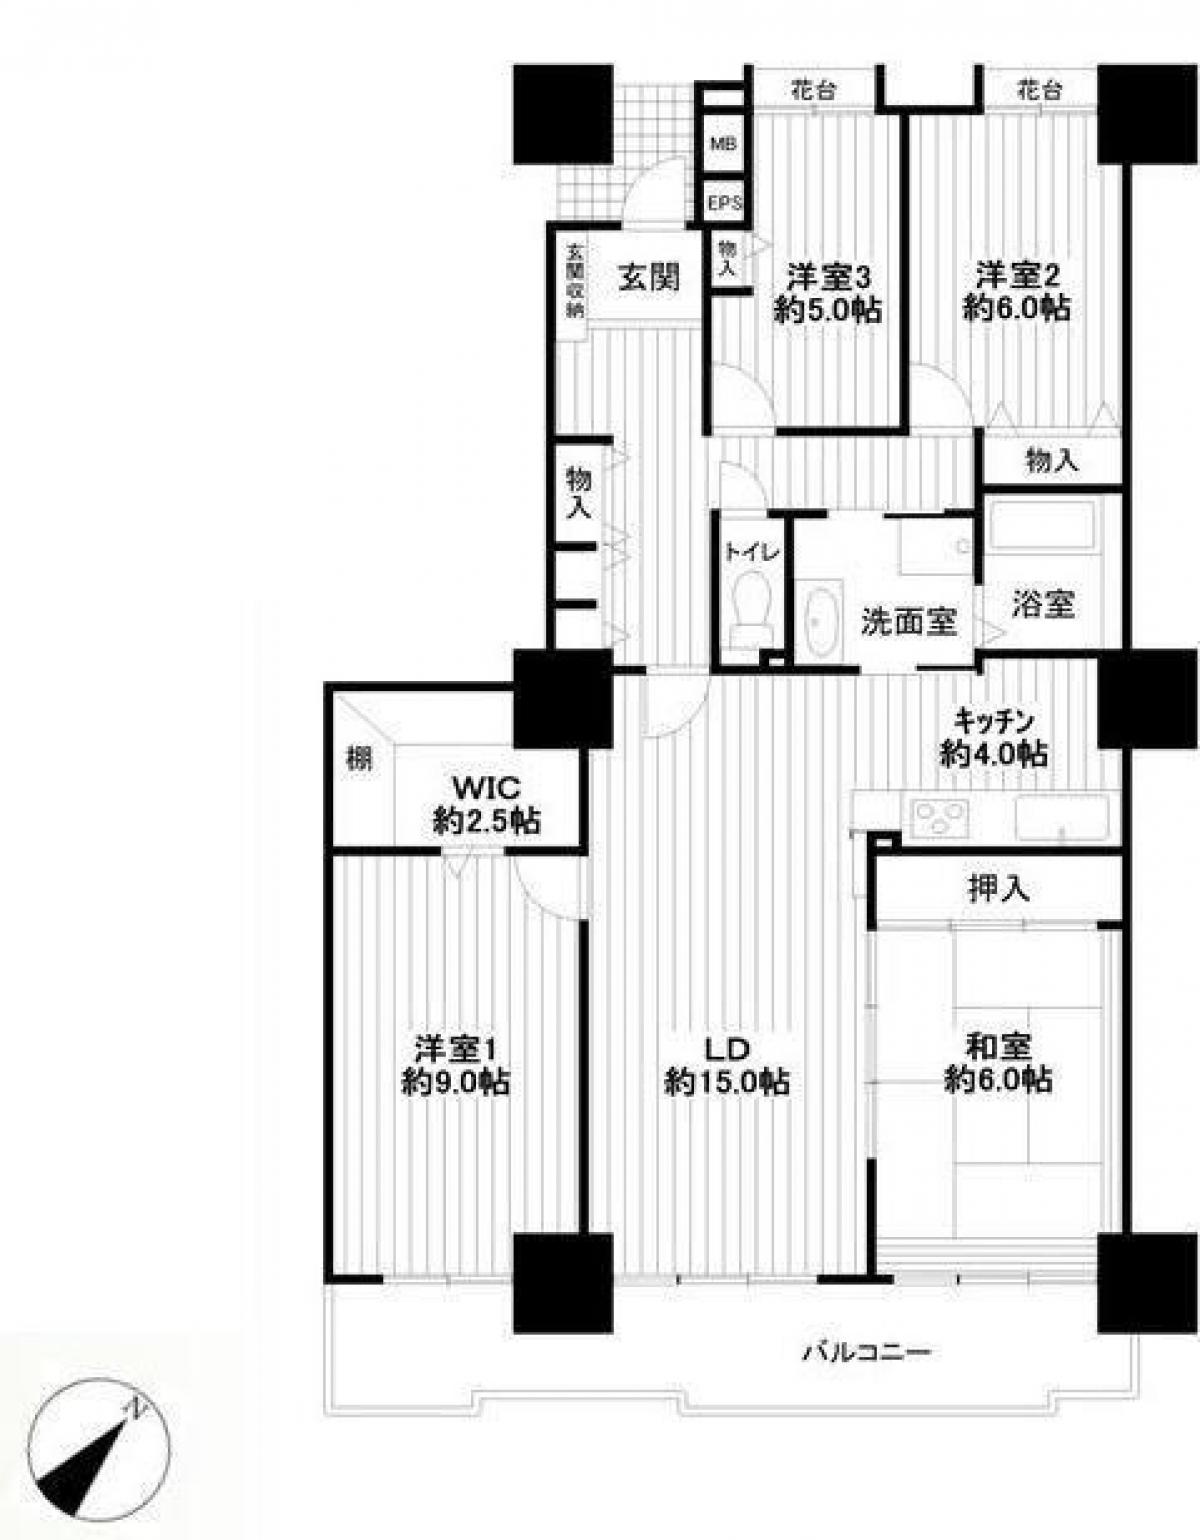 Picture of Apartment For Sale in Inagi Shi, Tokyo, Japan